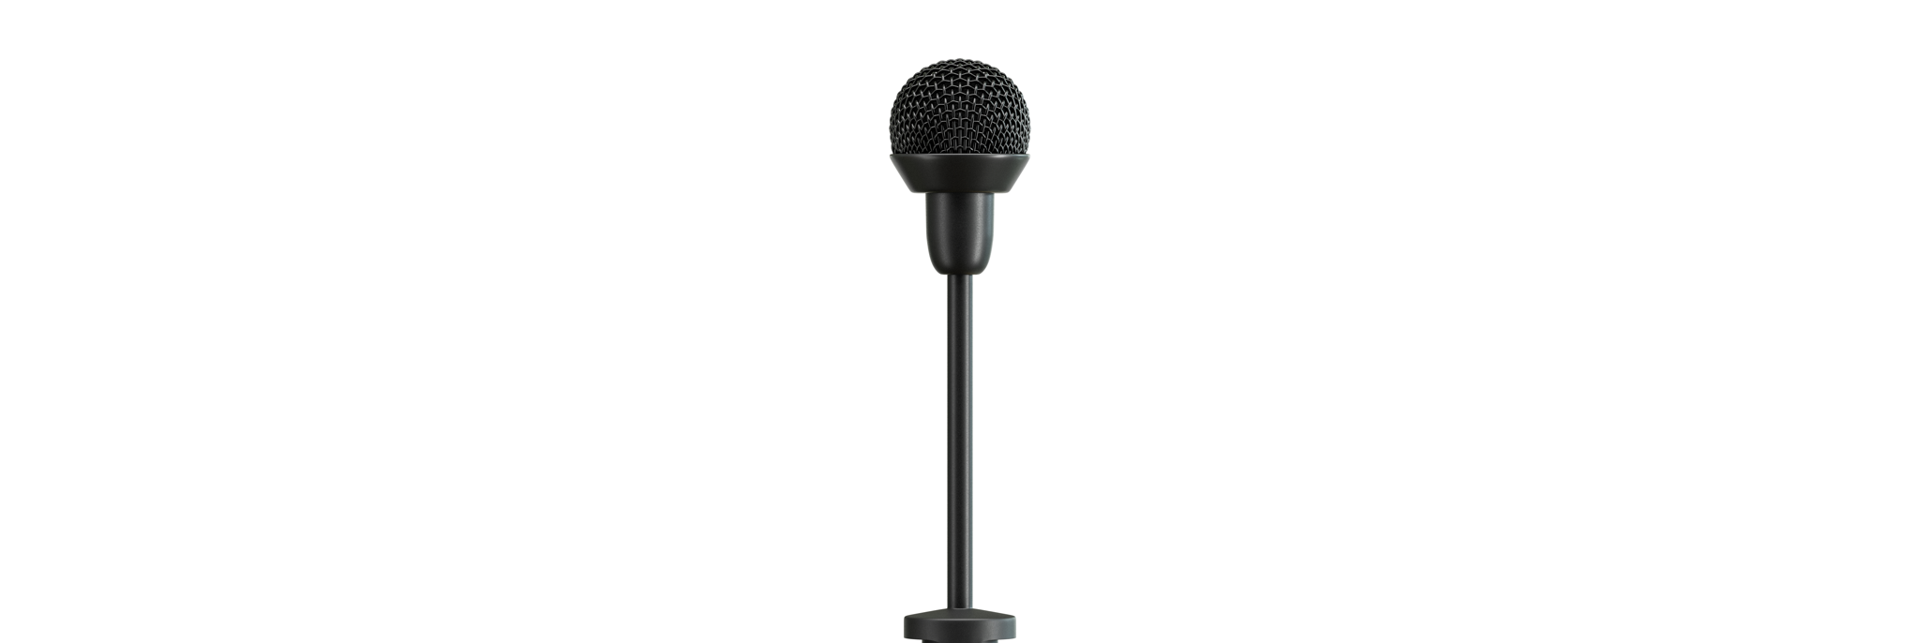 Sennheiser Introduces New Microphone for Presenters